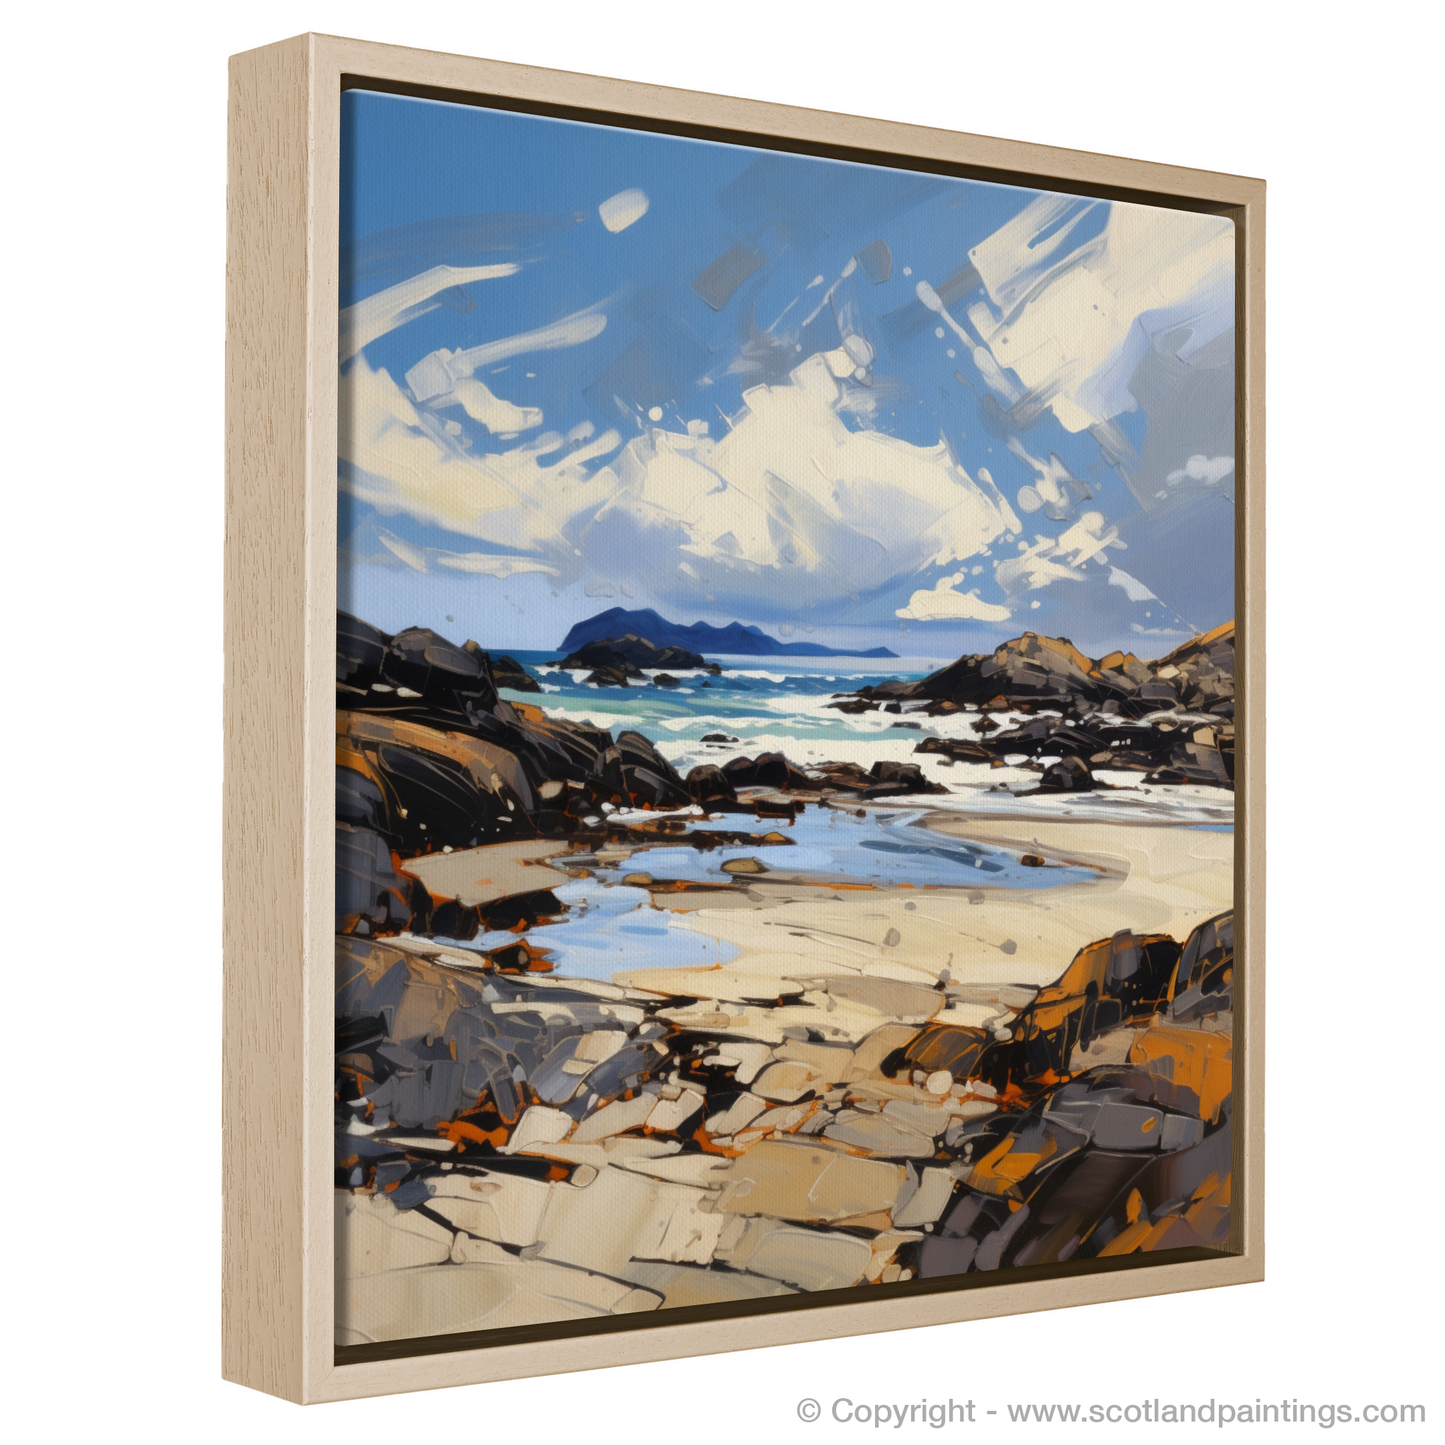 Painting and Art Print of Isle of Harris, Outer Hebrides entitled "Isle of Harris Unleashed: An Expressionist Tribute".